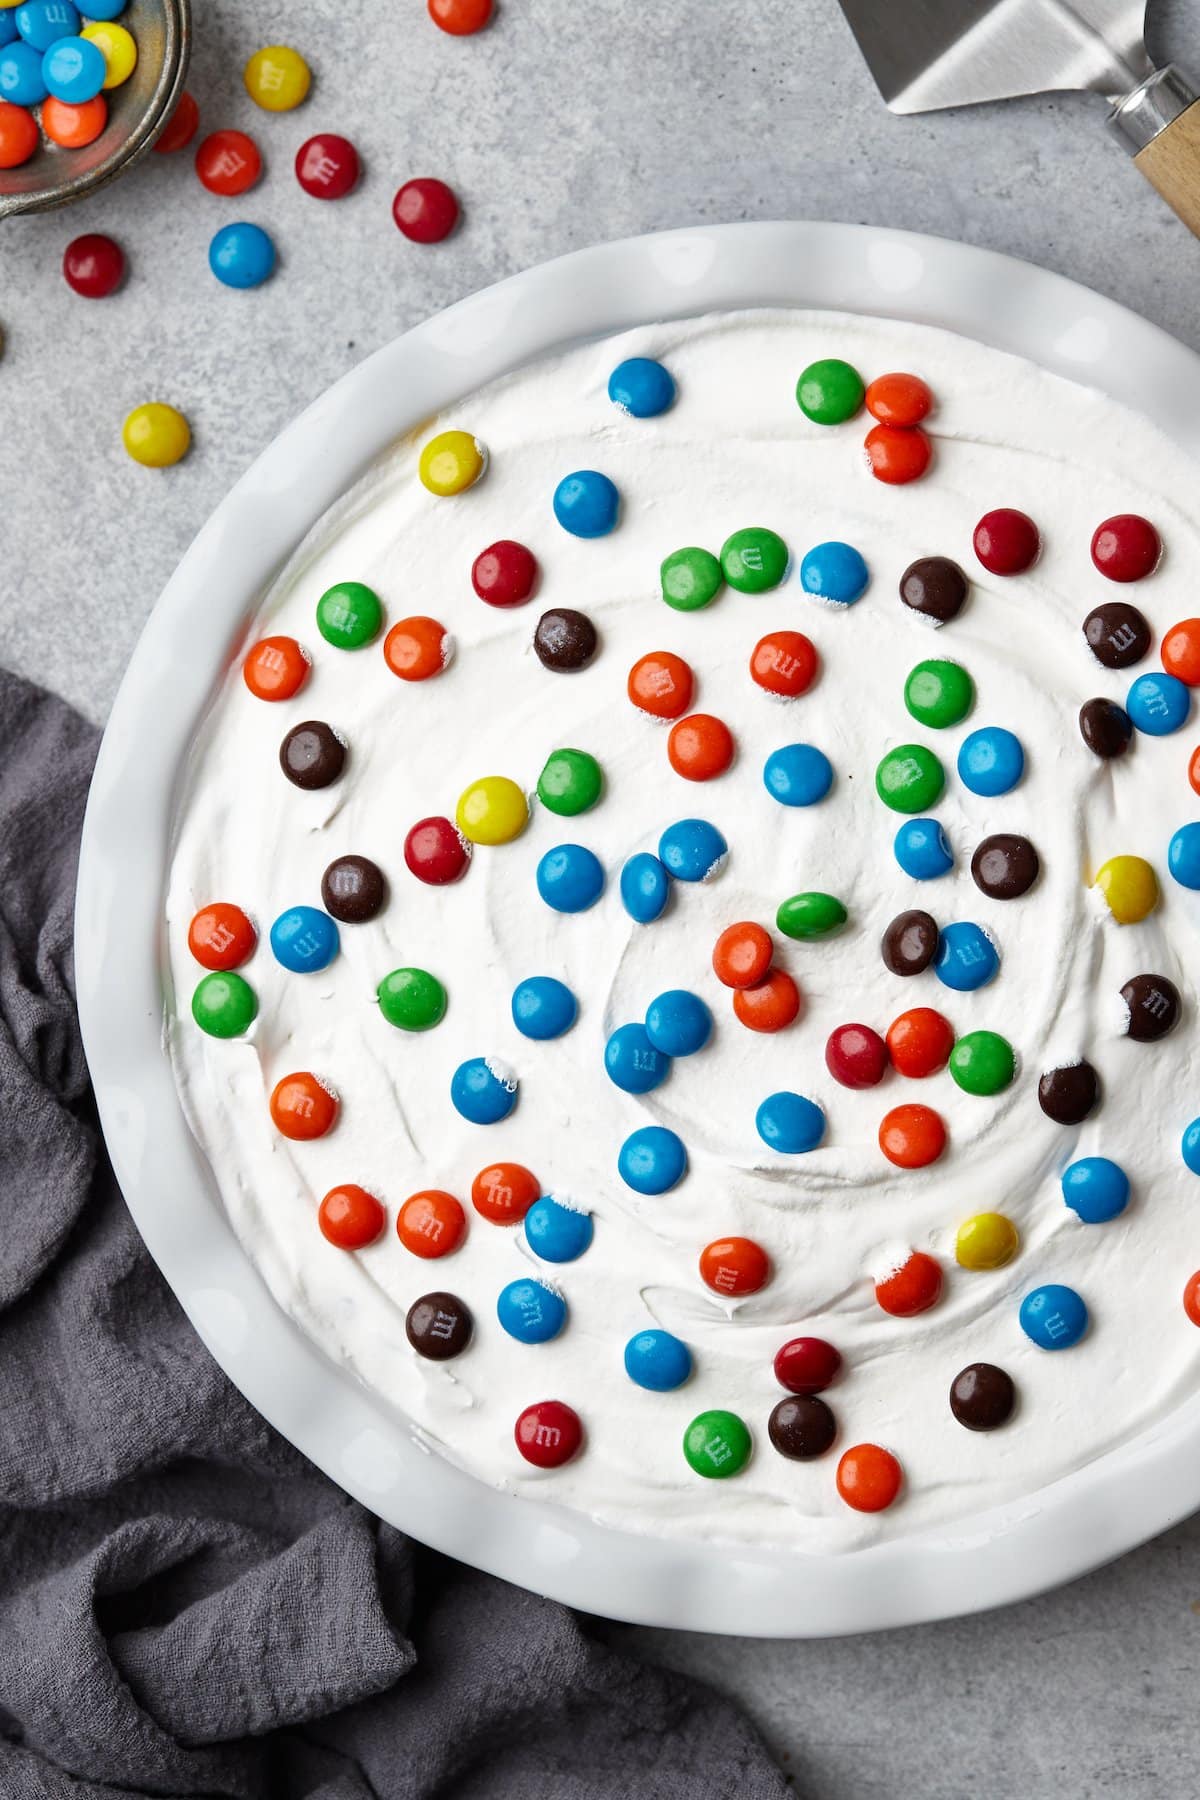 Top view of a whole candy pie topped with whipped cream and M&Ms.